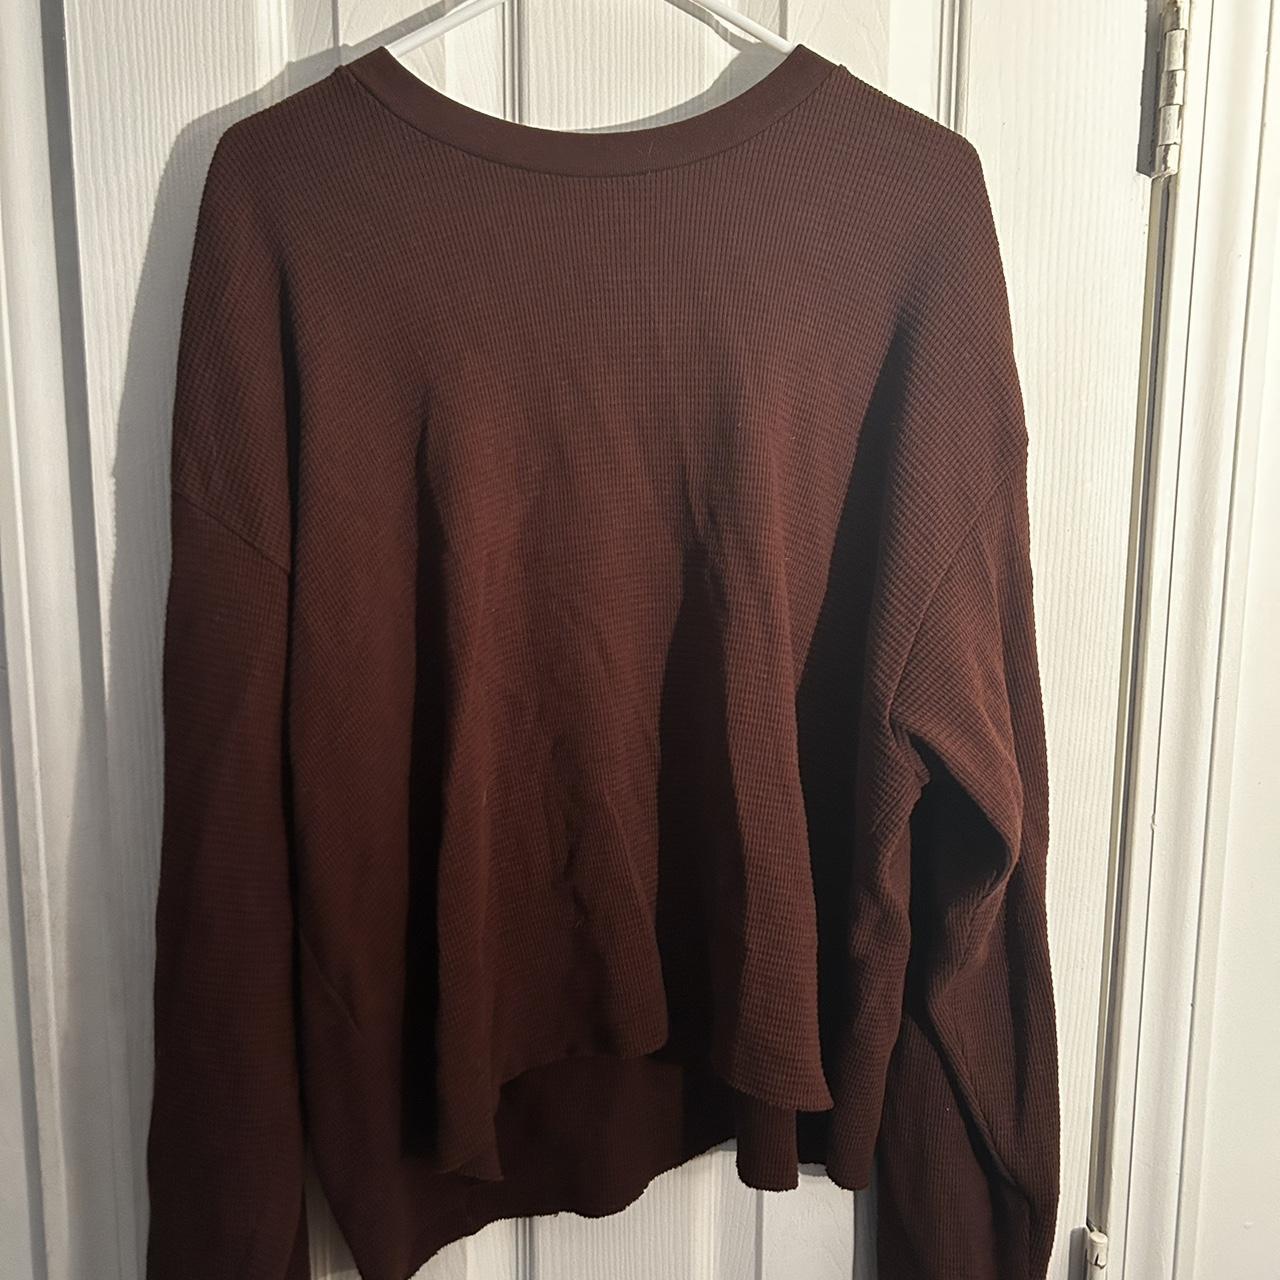 Gv gallery cropped thermal Size M Raspberry hills... - Depop